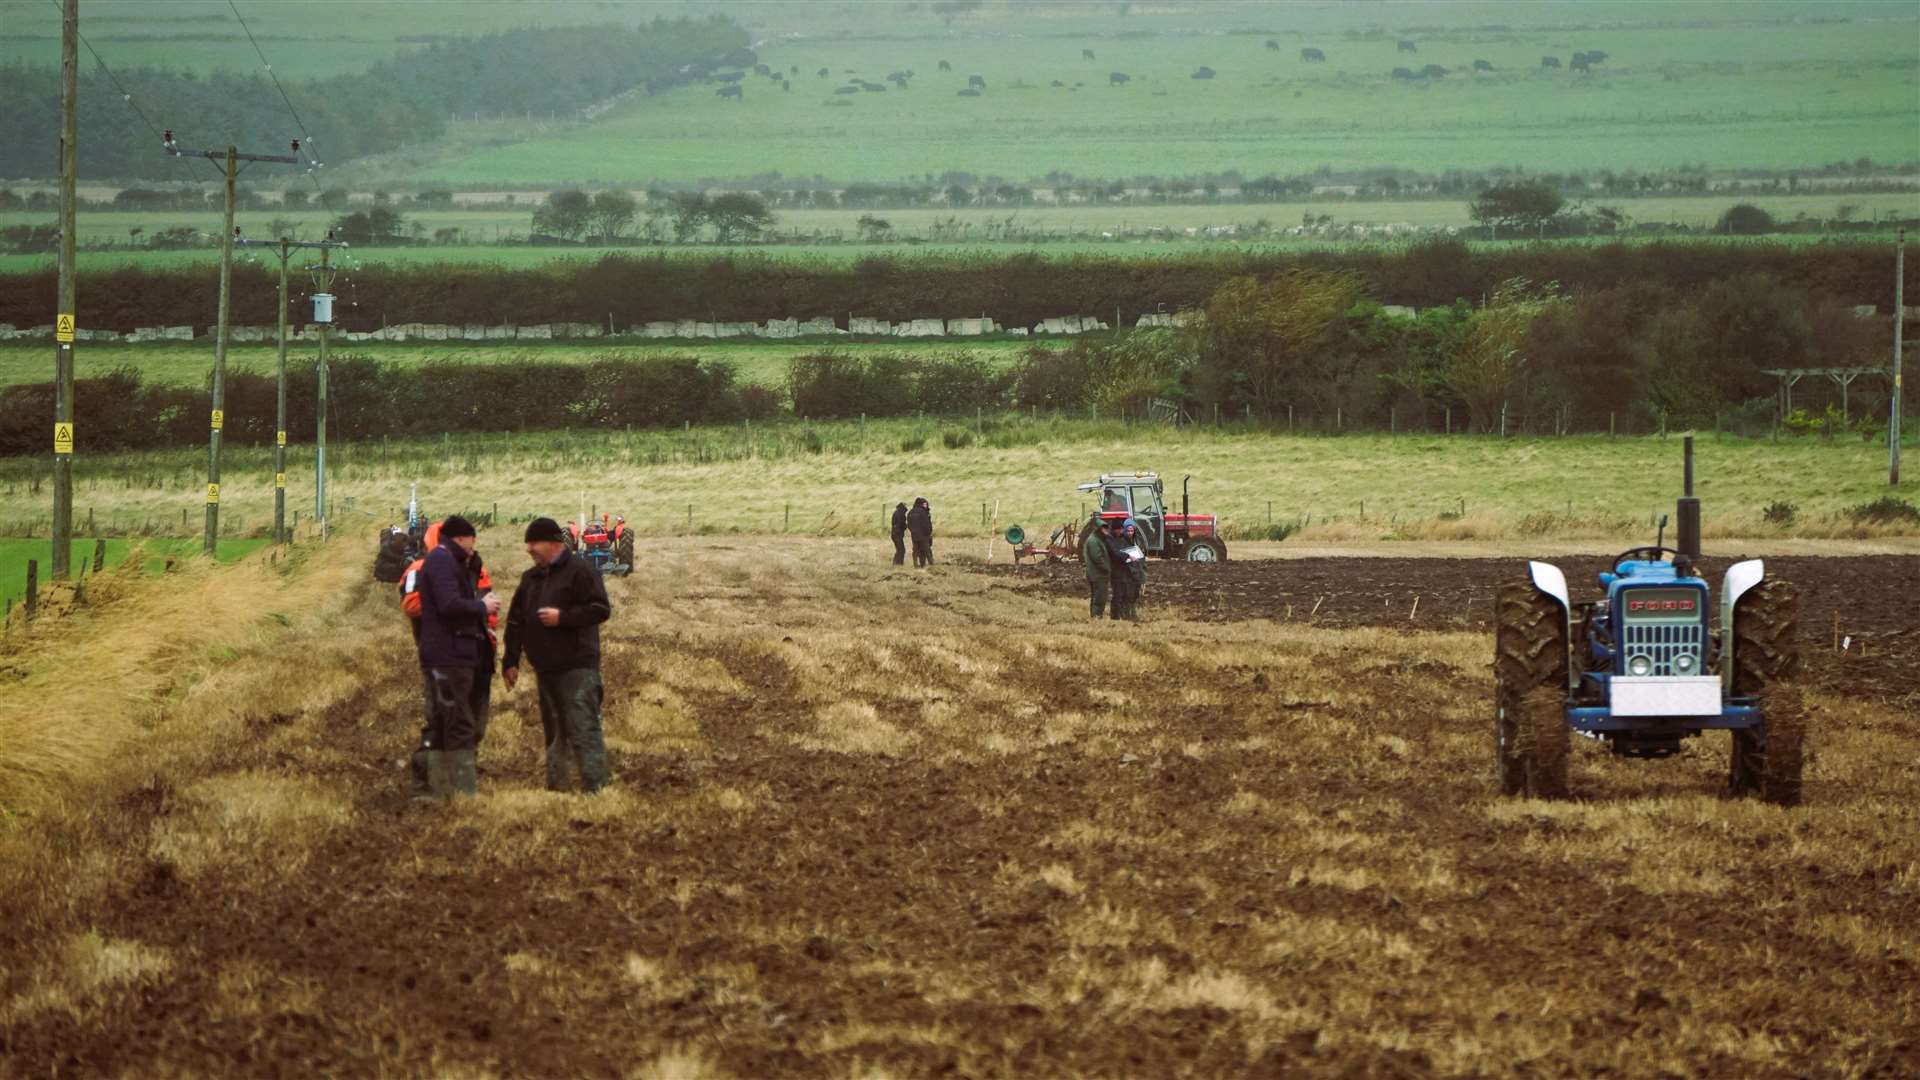 The wintry conditions were hard but the ground was good on the day for the ploughing. Picture: DGS